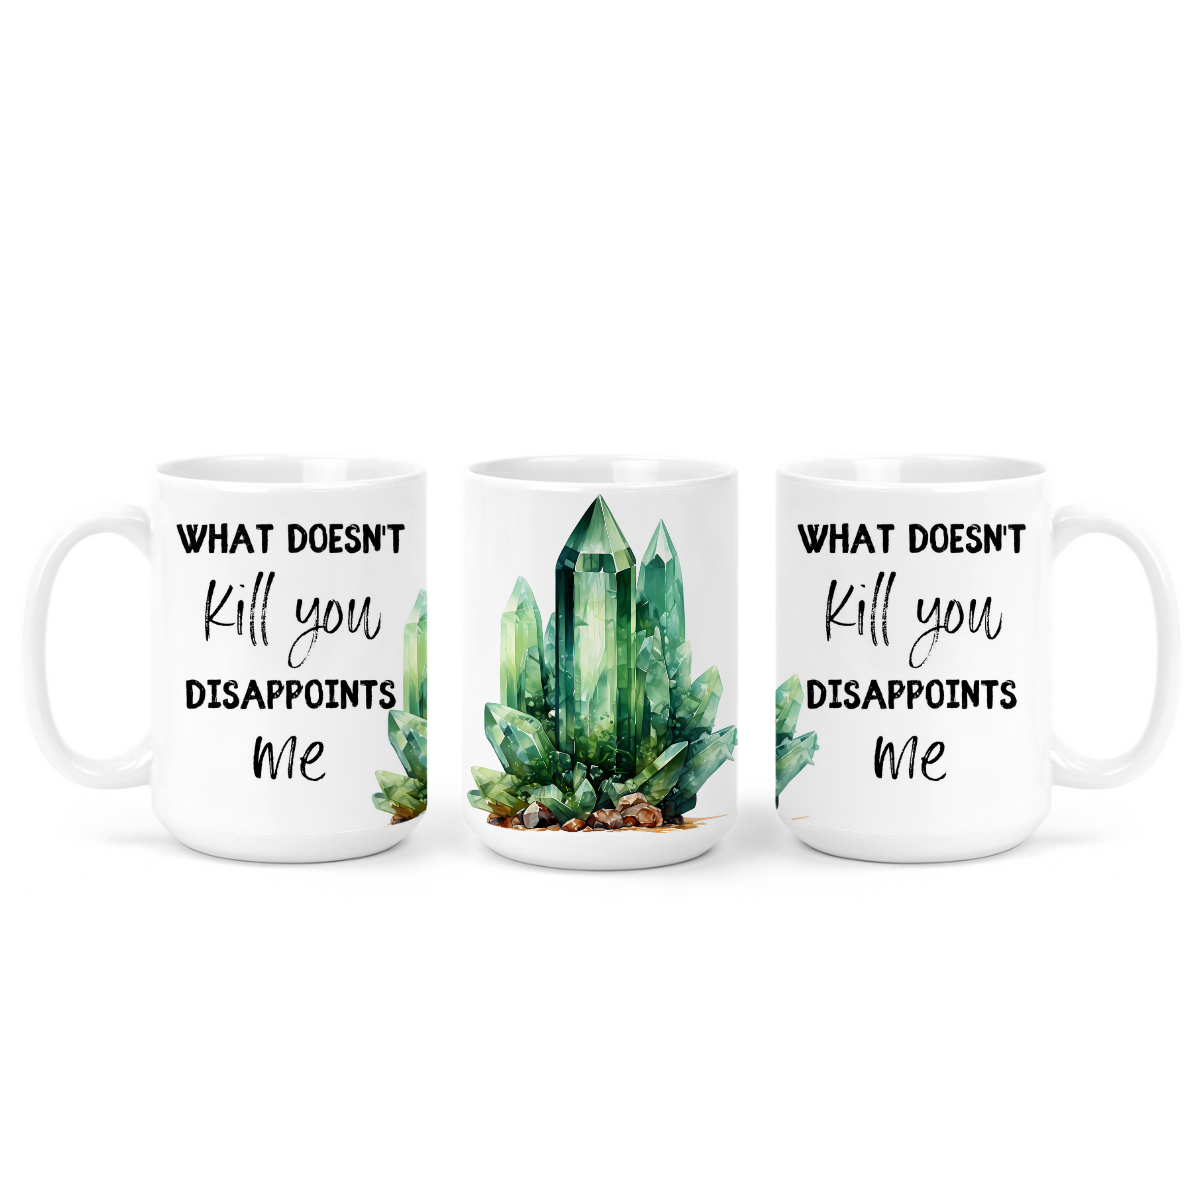 What Doesn't Kill You Disappoints Me | Mug - The Pretty Things.ca